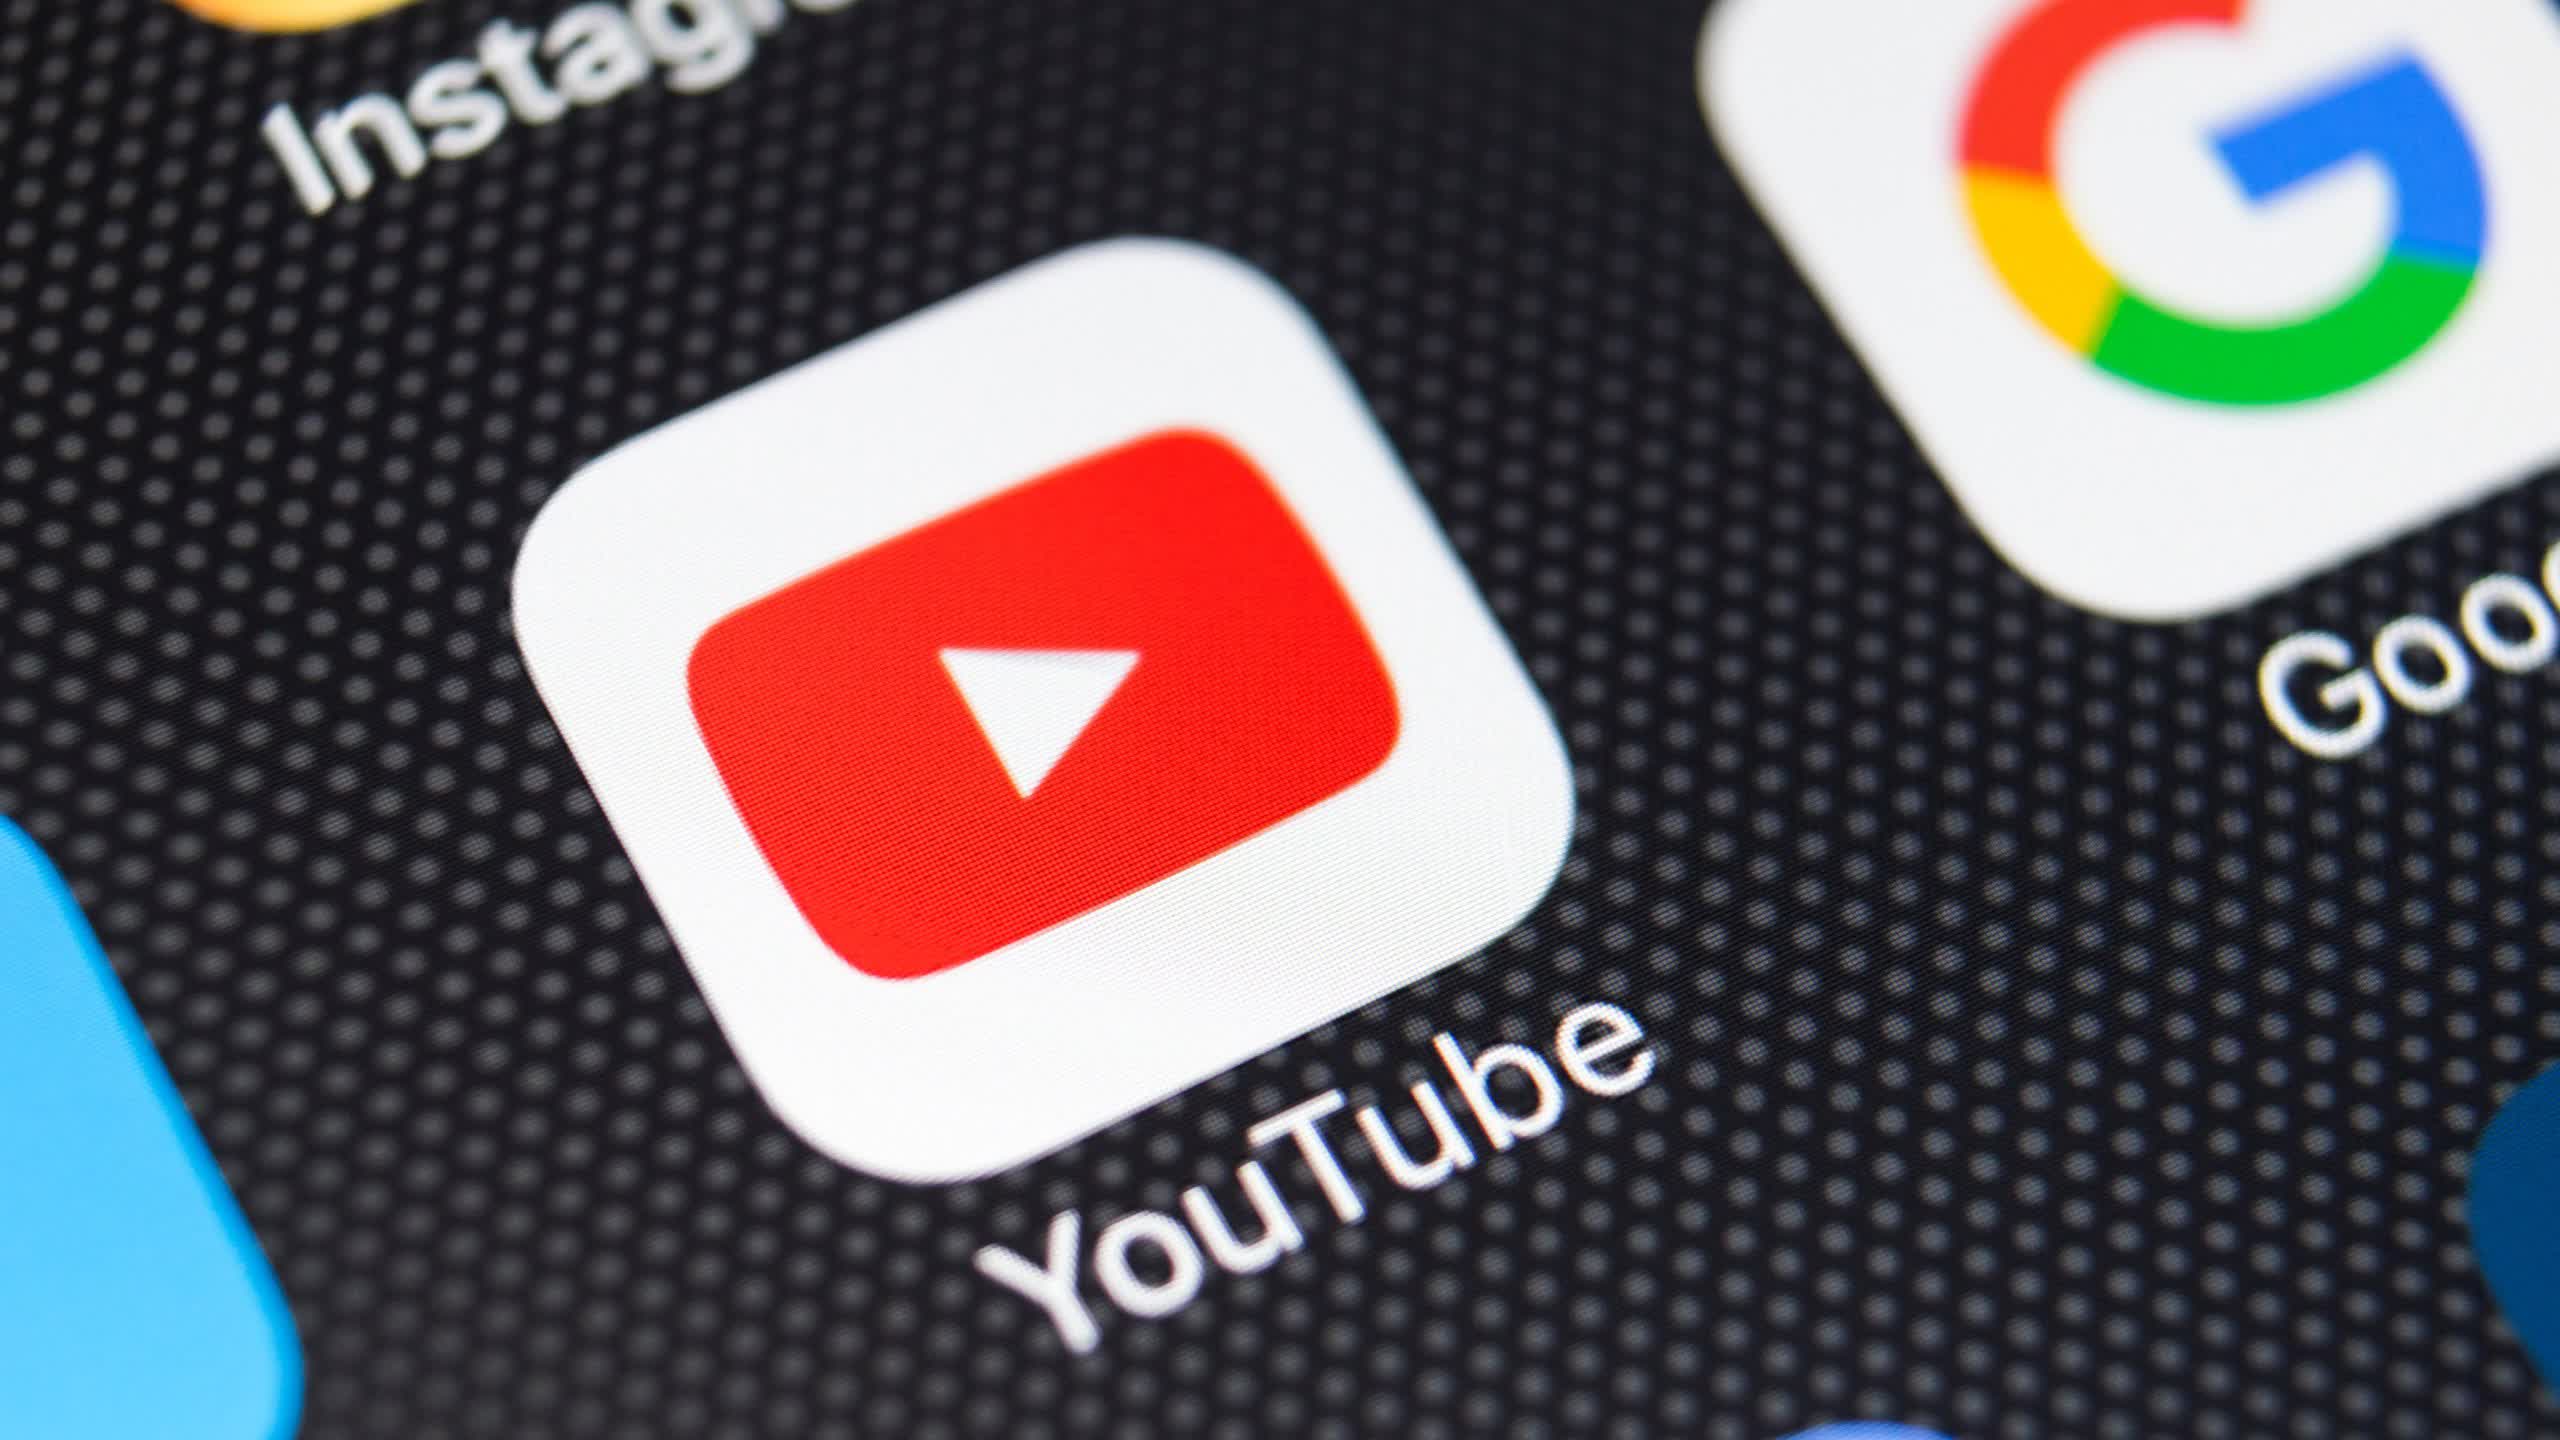 YouTube is testing browser mini-games for premium users